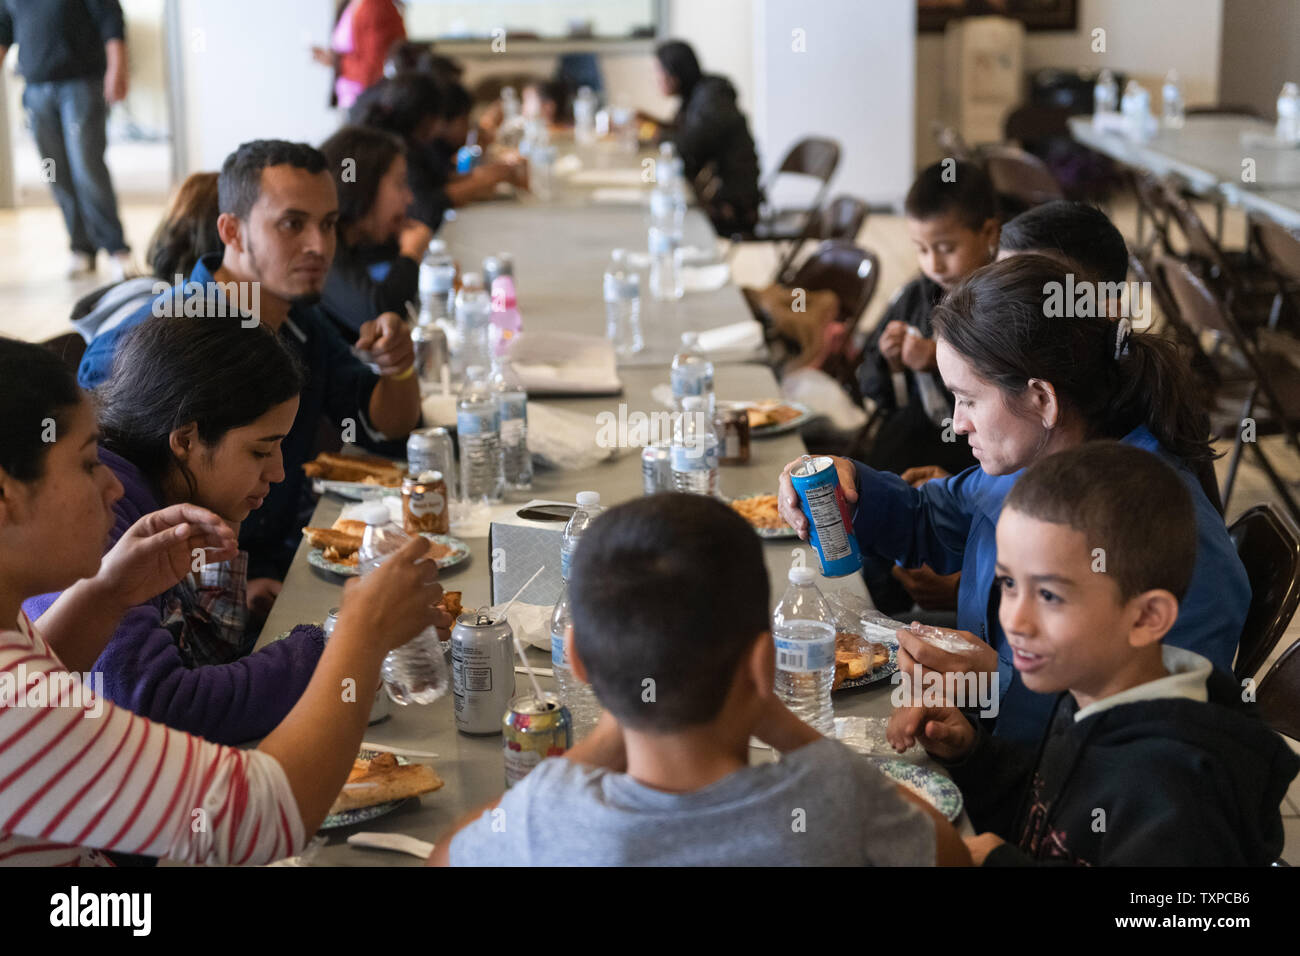 Migrants released from ICE custody eat lunch at Camino de Vida in El Paso, Texas on March 22, 2019. Border Patrol detention centers have soared past capacity, prompting the mass release of migrants. ICE is set to release upwards of 600 migrants per day from March 22 through March 24.      Photo by Justin Hamel/UPI Stock Photo